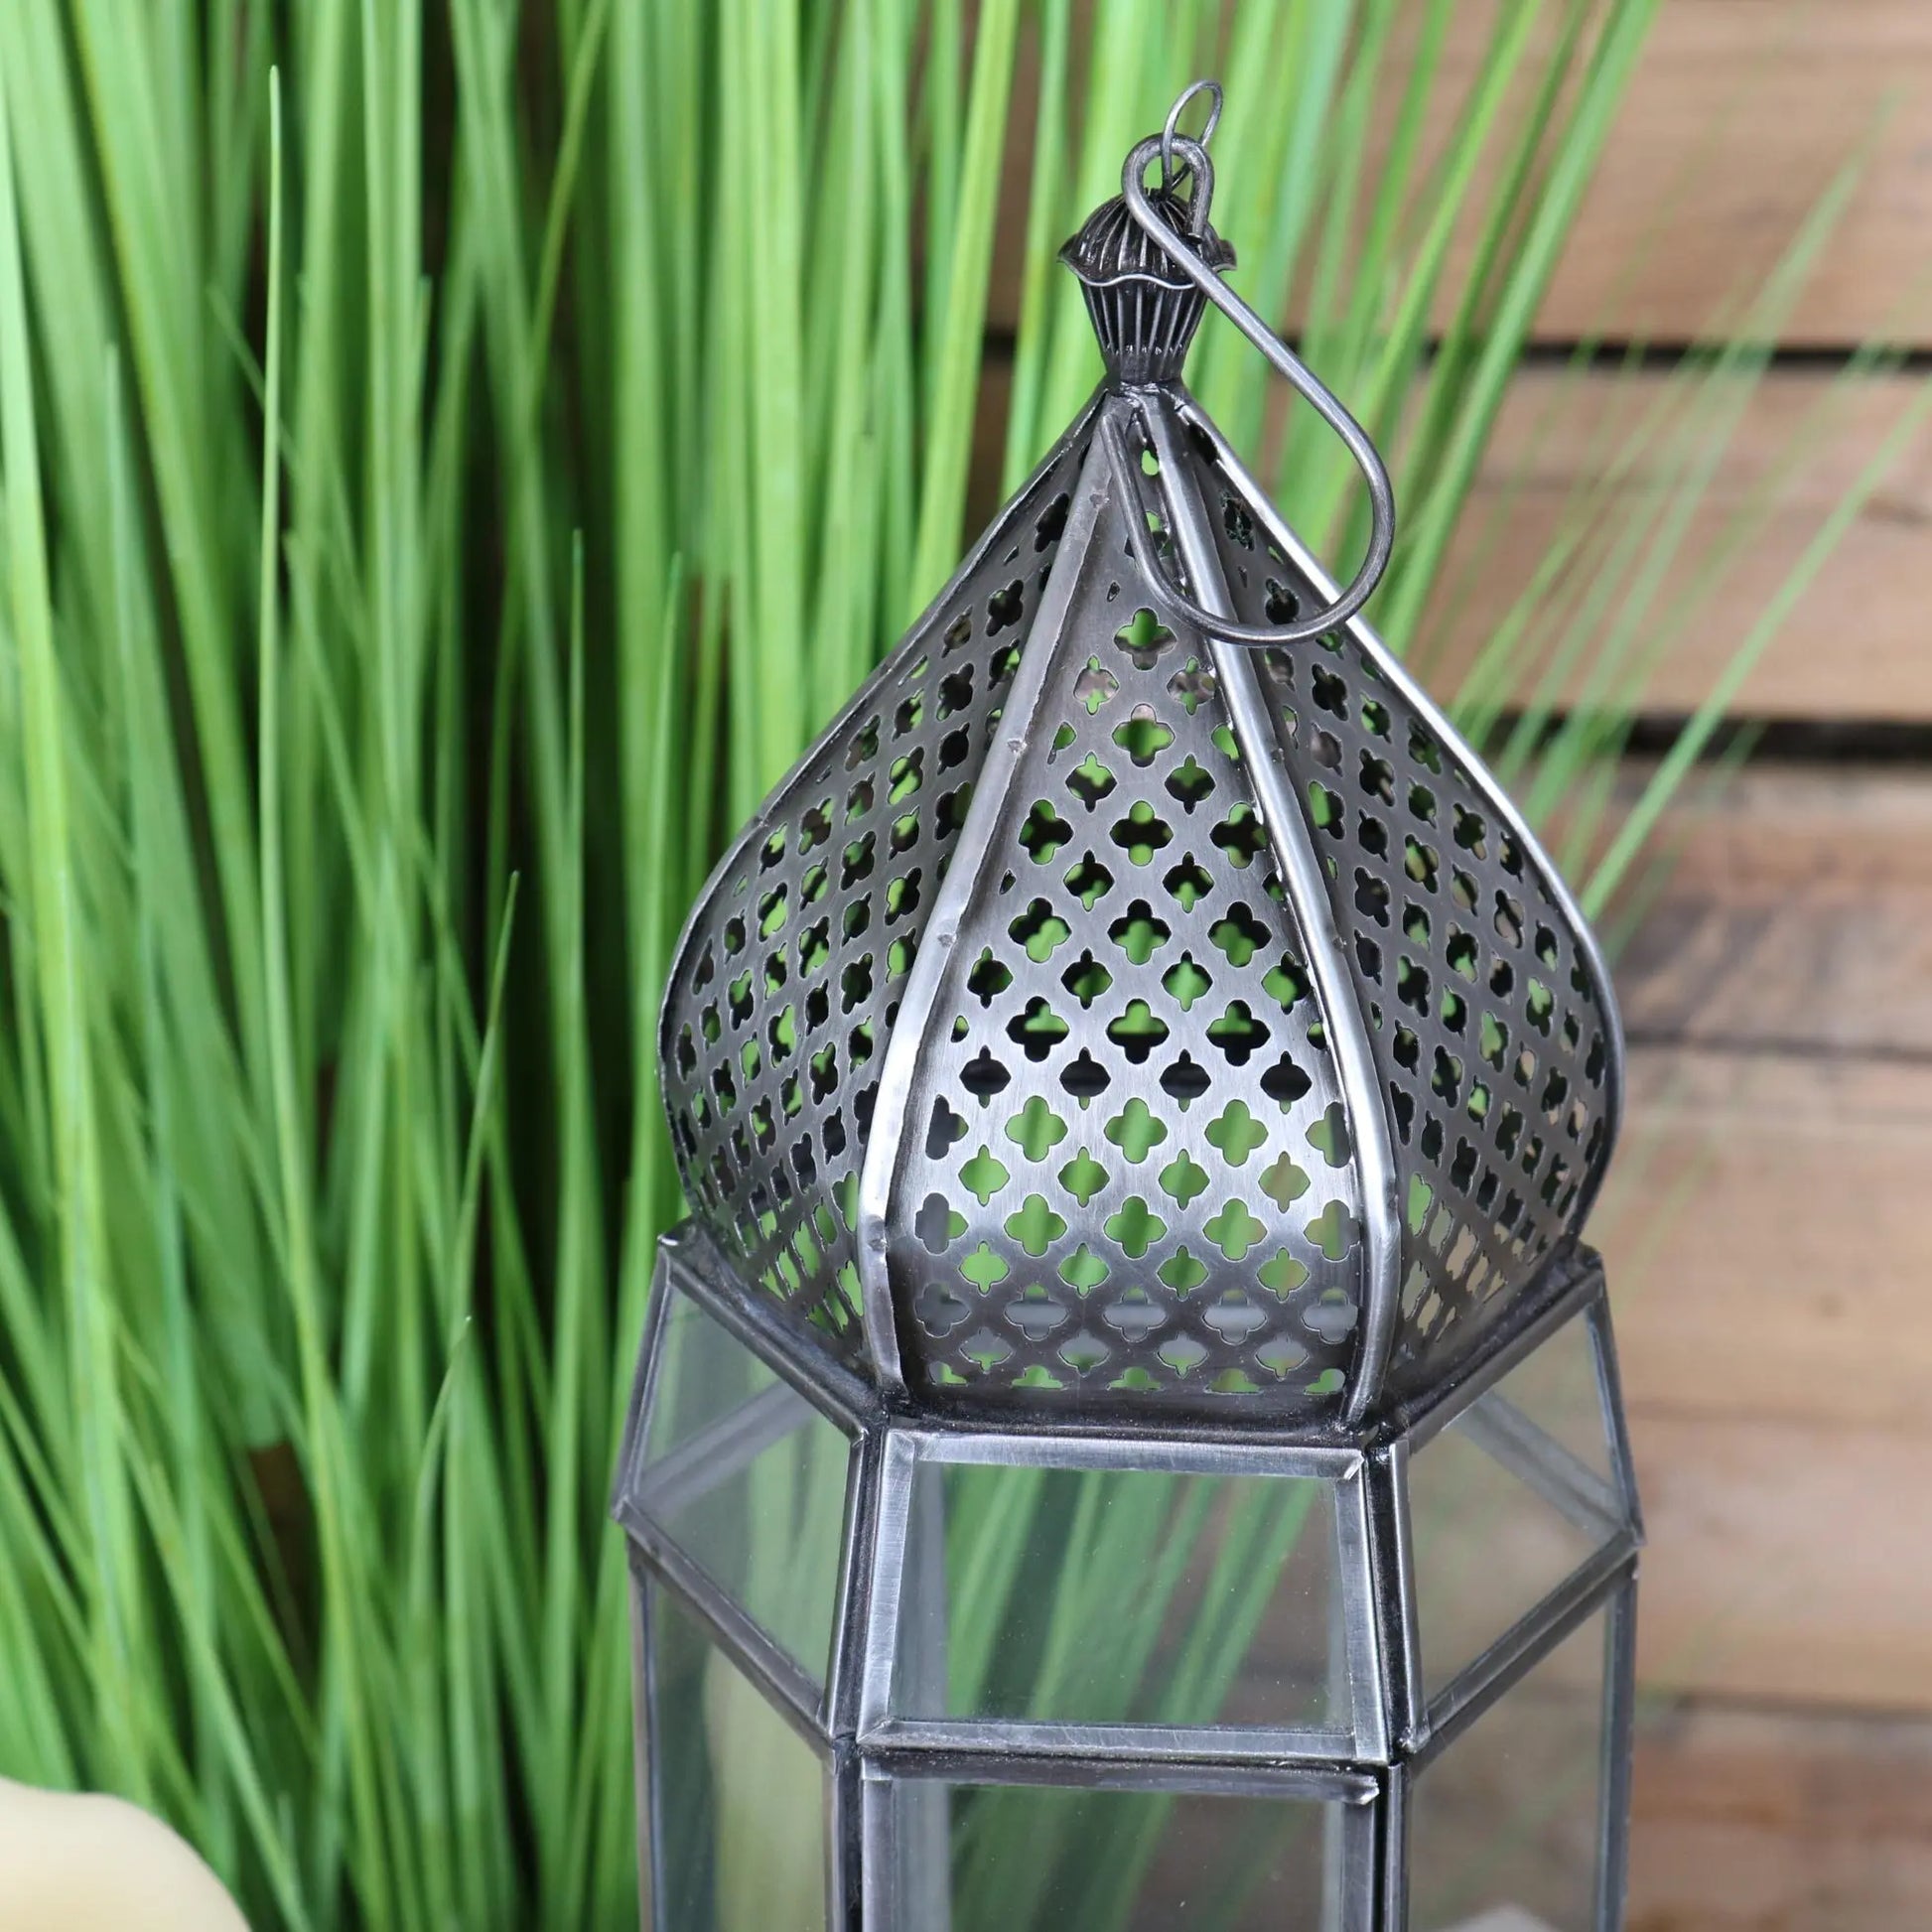 Inavi Moroccan Dome Panelled Tapered Lantern - Closeup of Dome Top and Hook